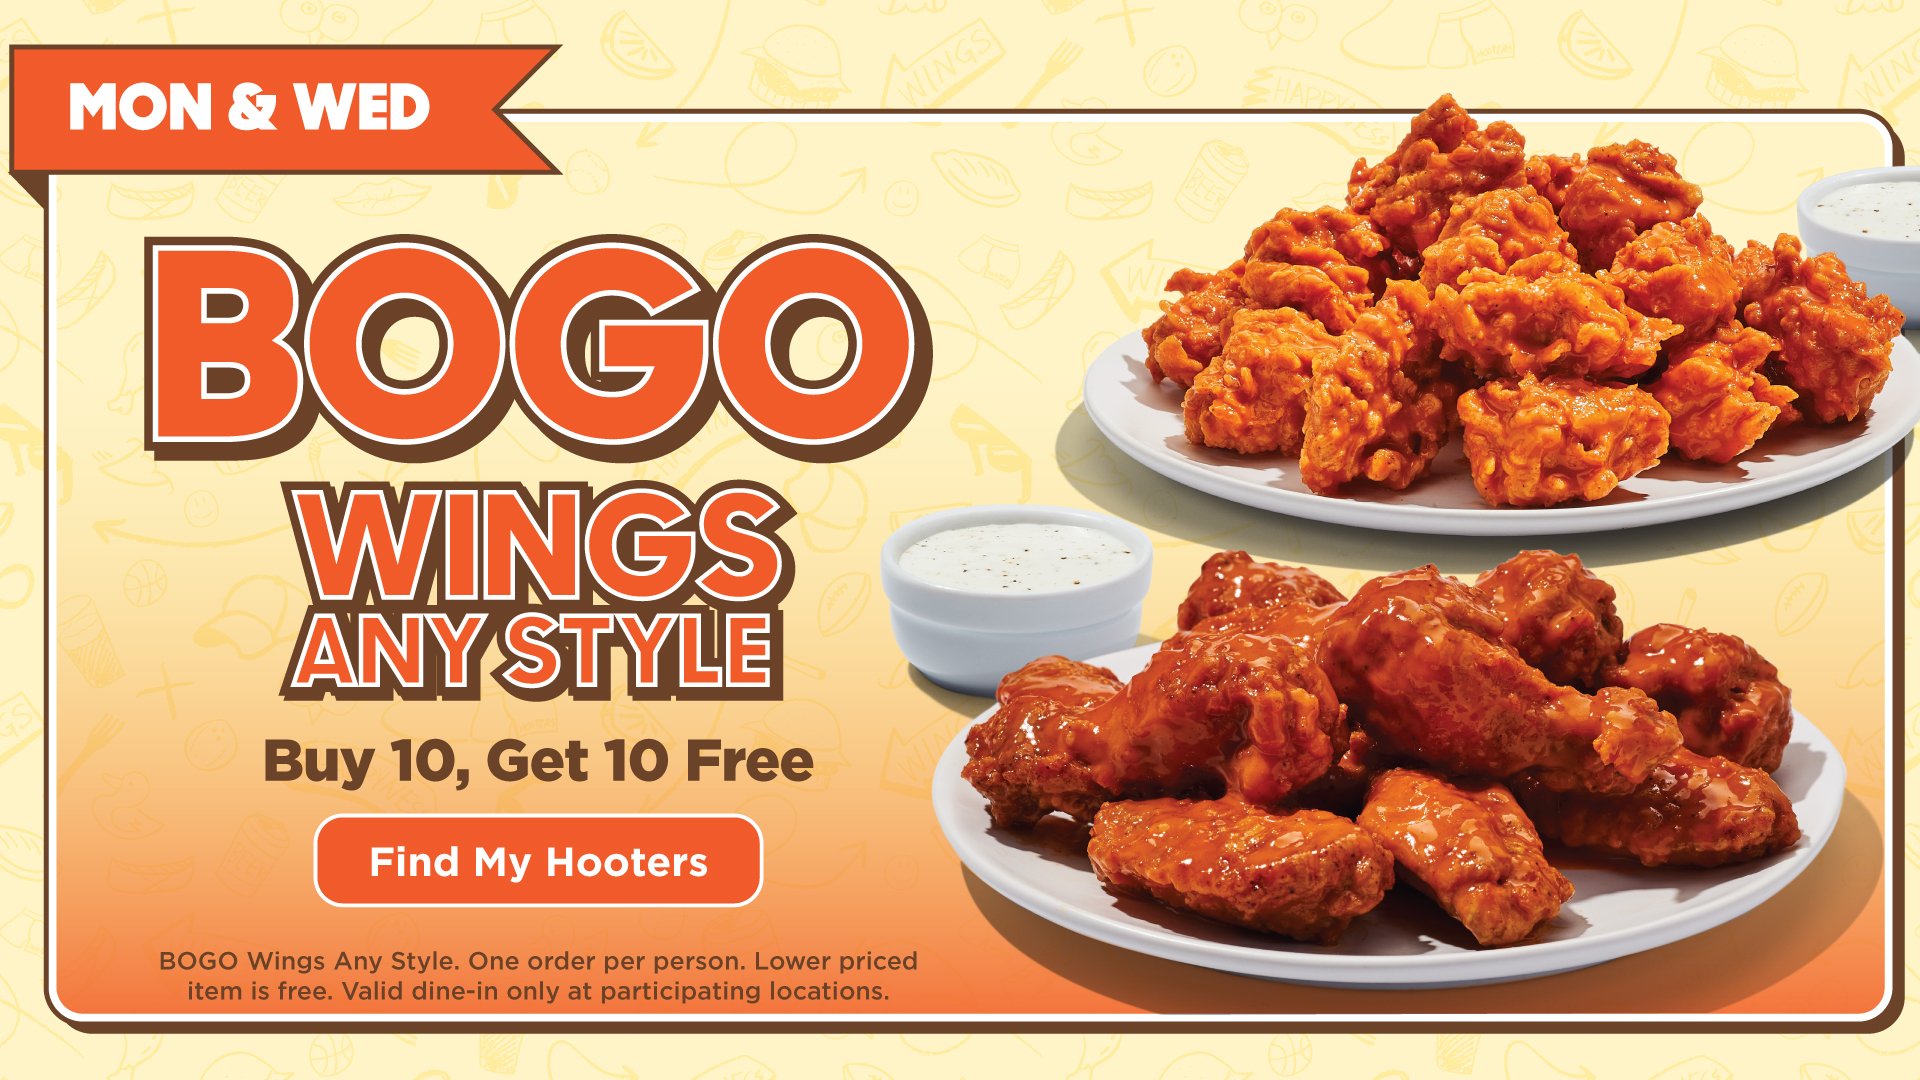 Mon & Wed. BOGO wings, any style. Buy 10, get 10 free.